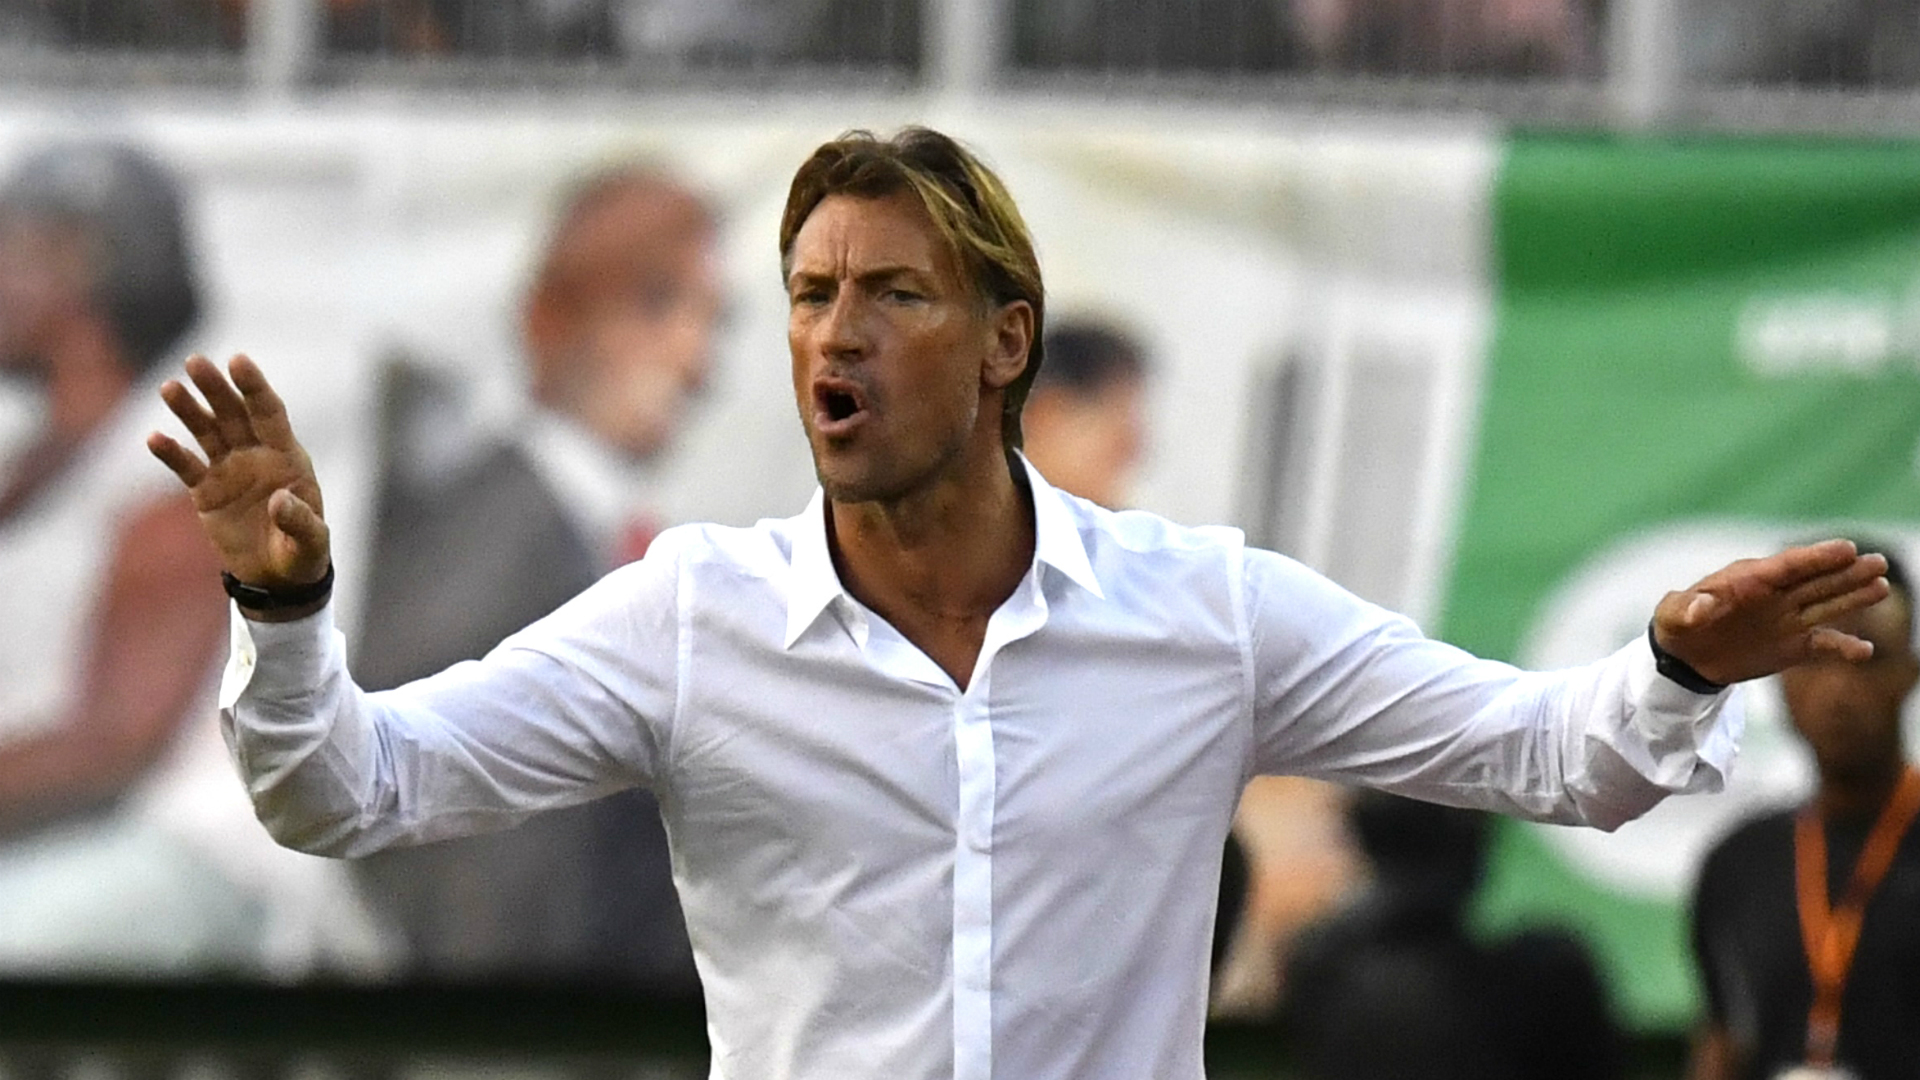 Afcon 2019: Morocco didn't start the tournament well - Renard